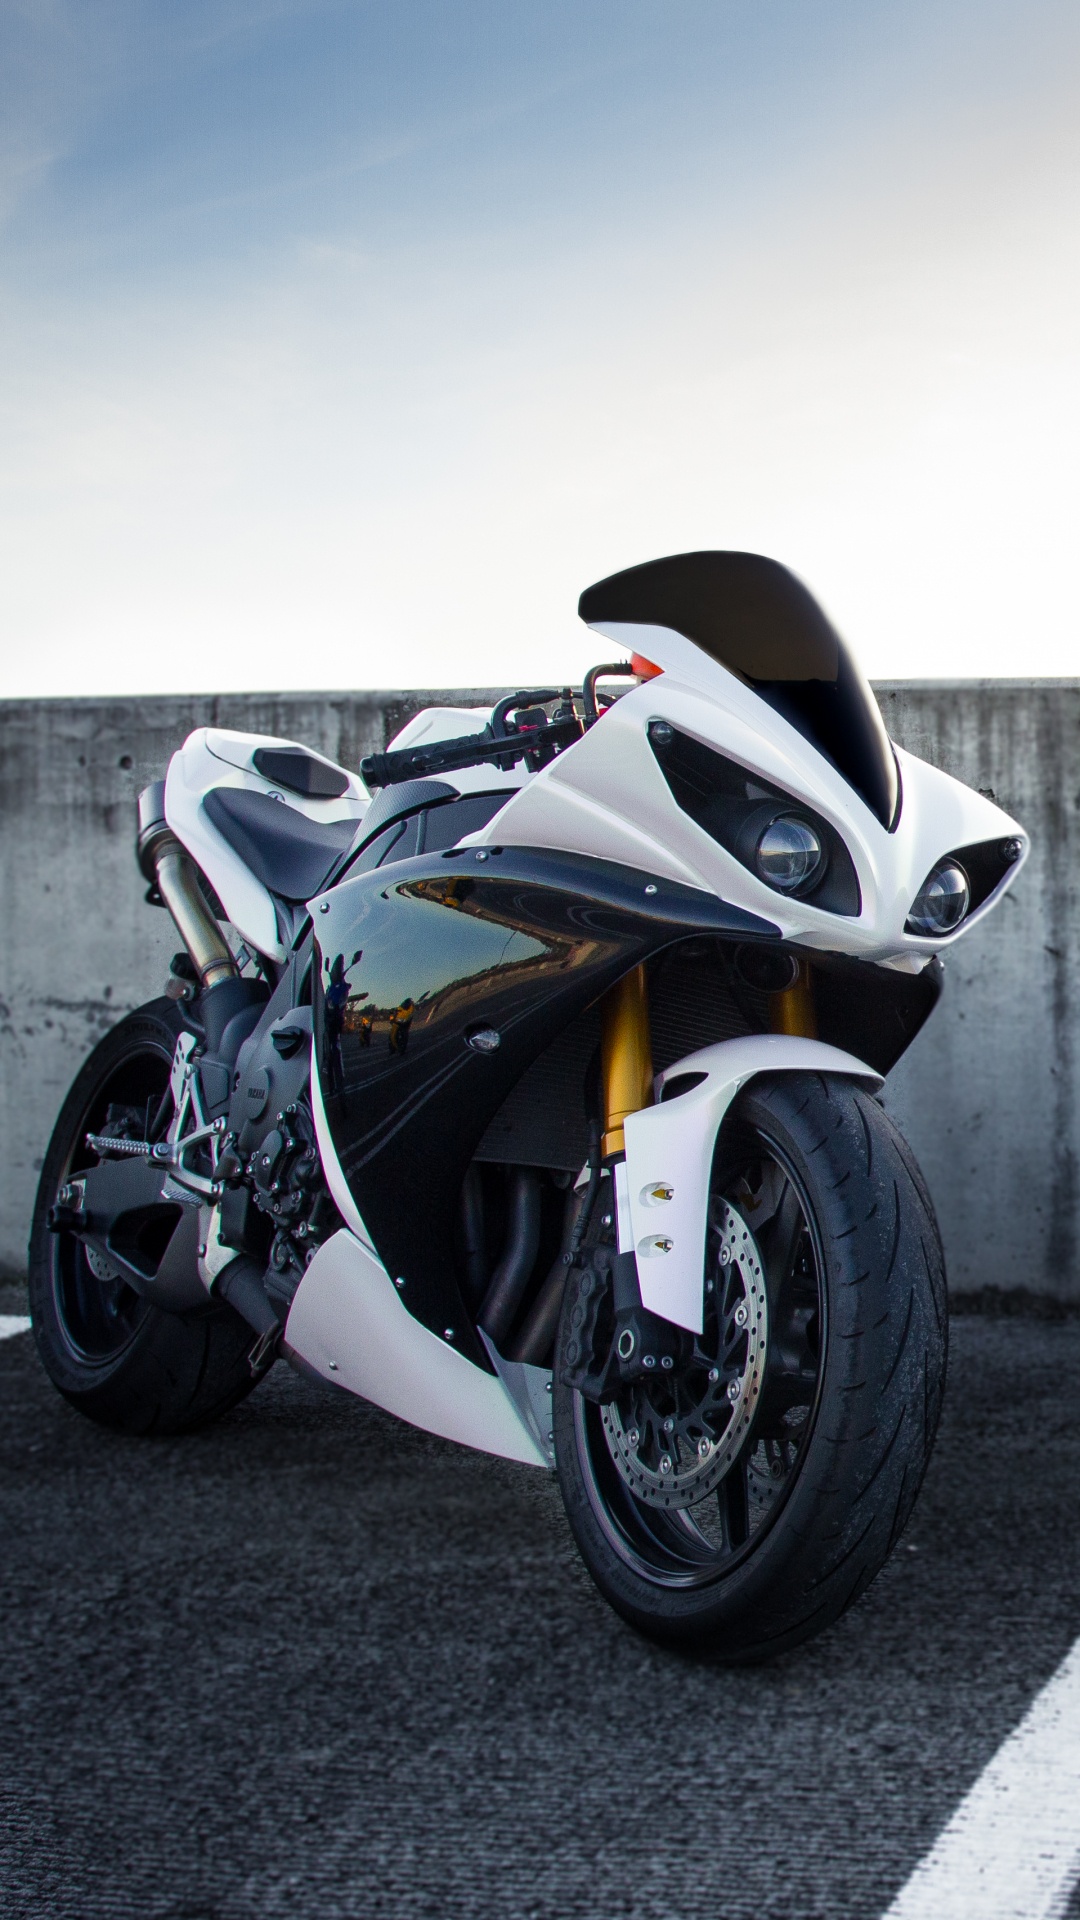 Black and White Sports Bike Parked on Gray Concrete Road During Daytime. Wallpaper in 1080x1920 Resolution